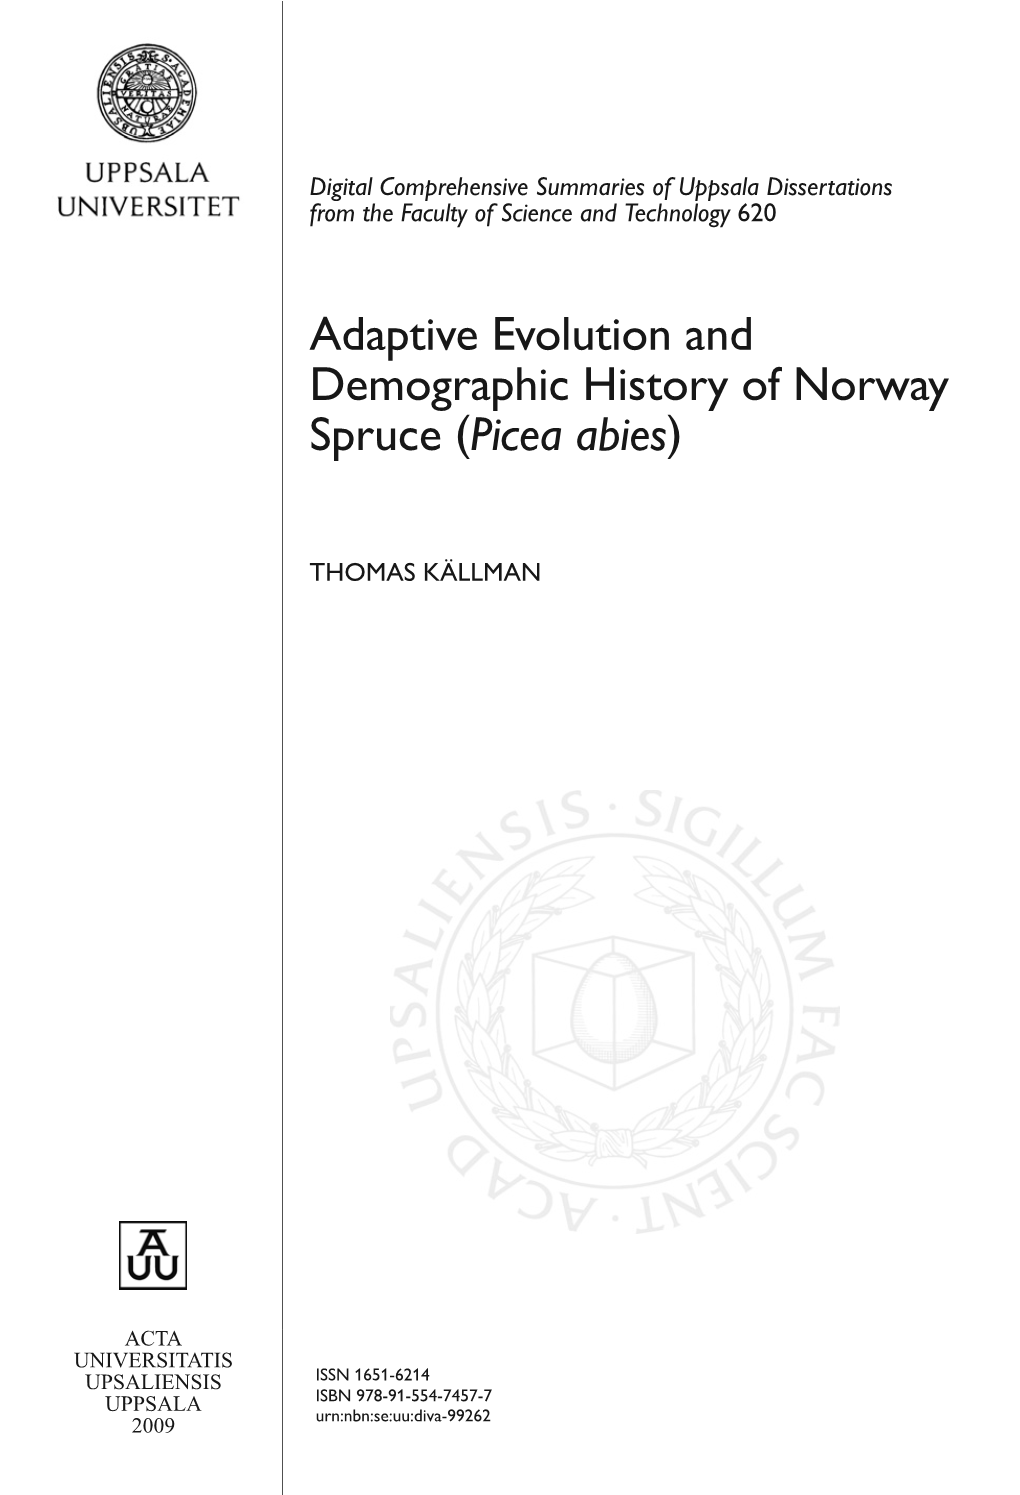 Adaptive Evolution and Demographic History of Norway Spruce